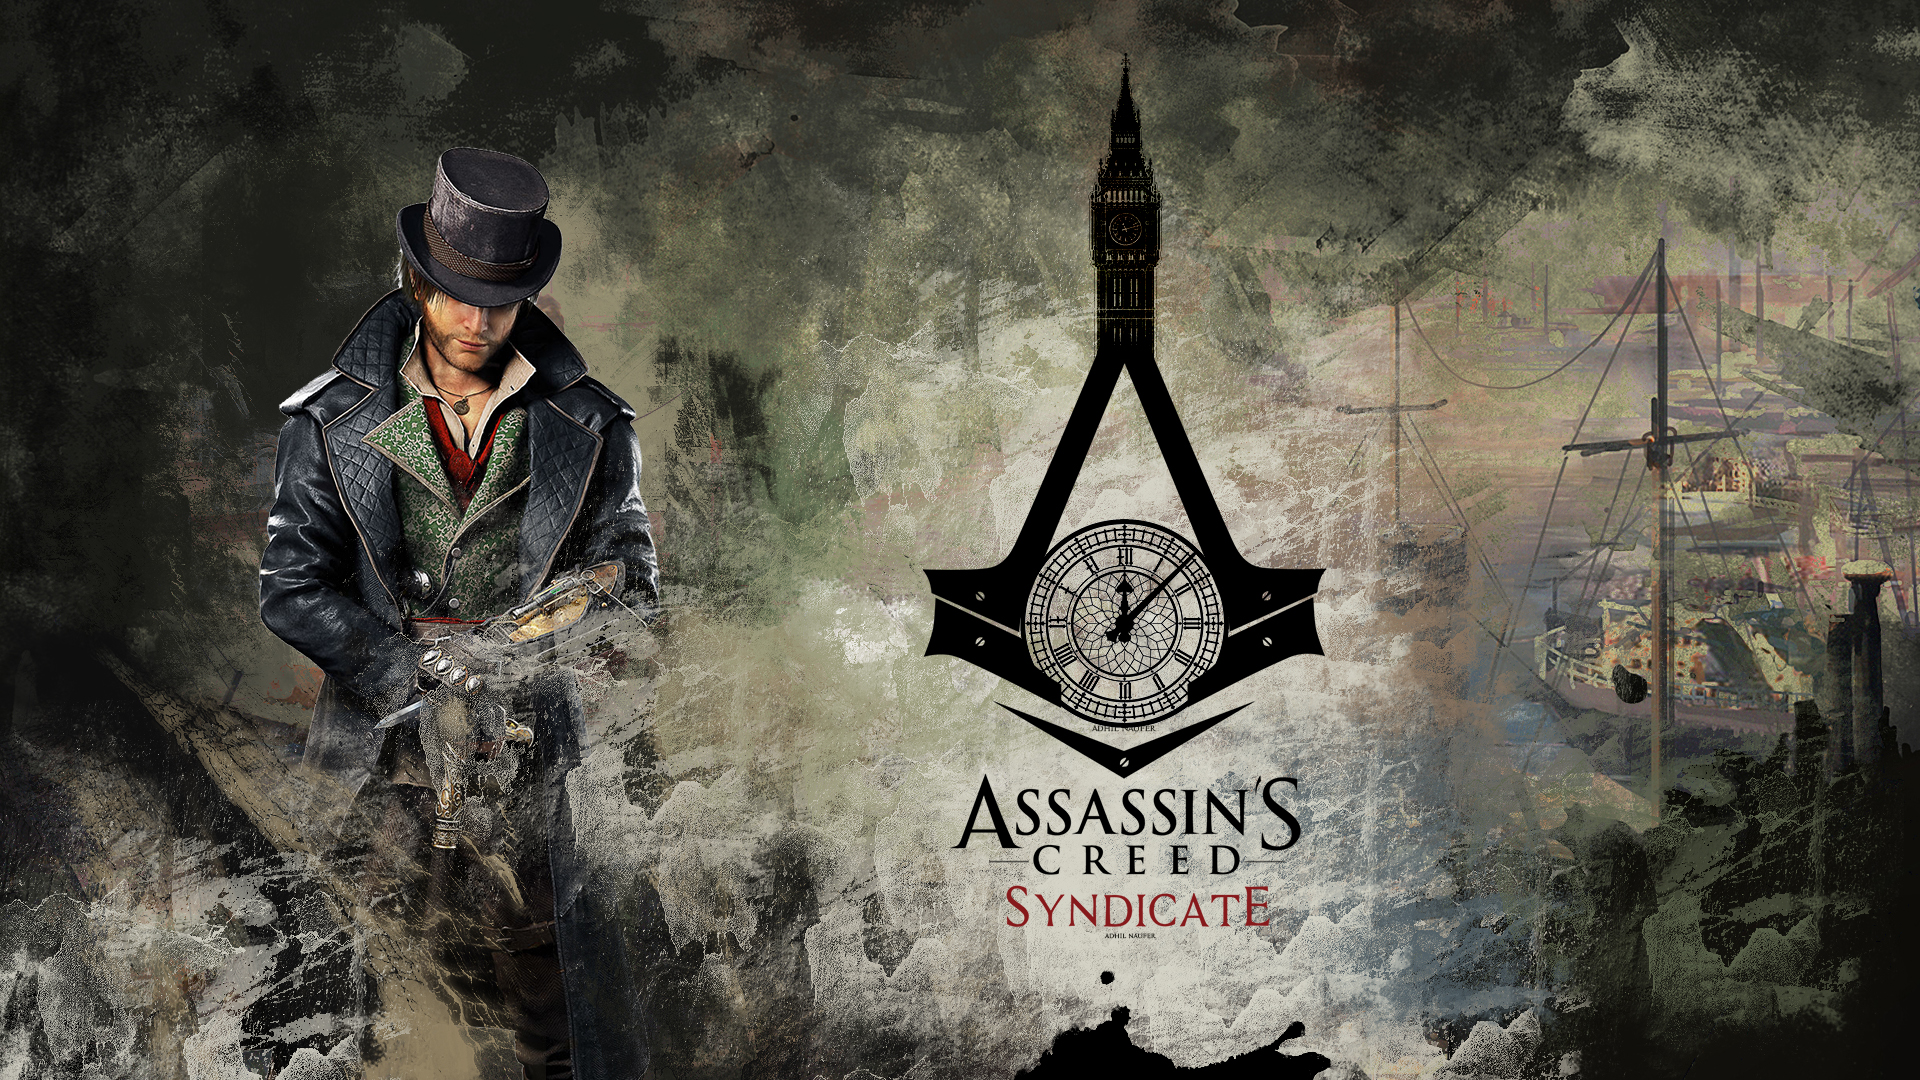 Assassins Creed Syndicate Wallpaper Hd Wallpaper Background Image